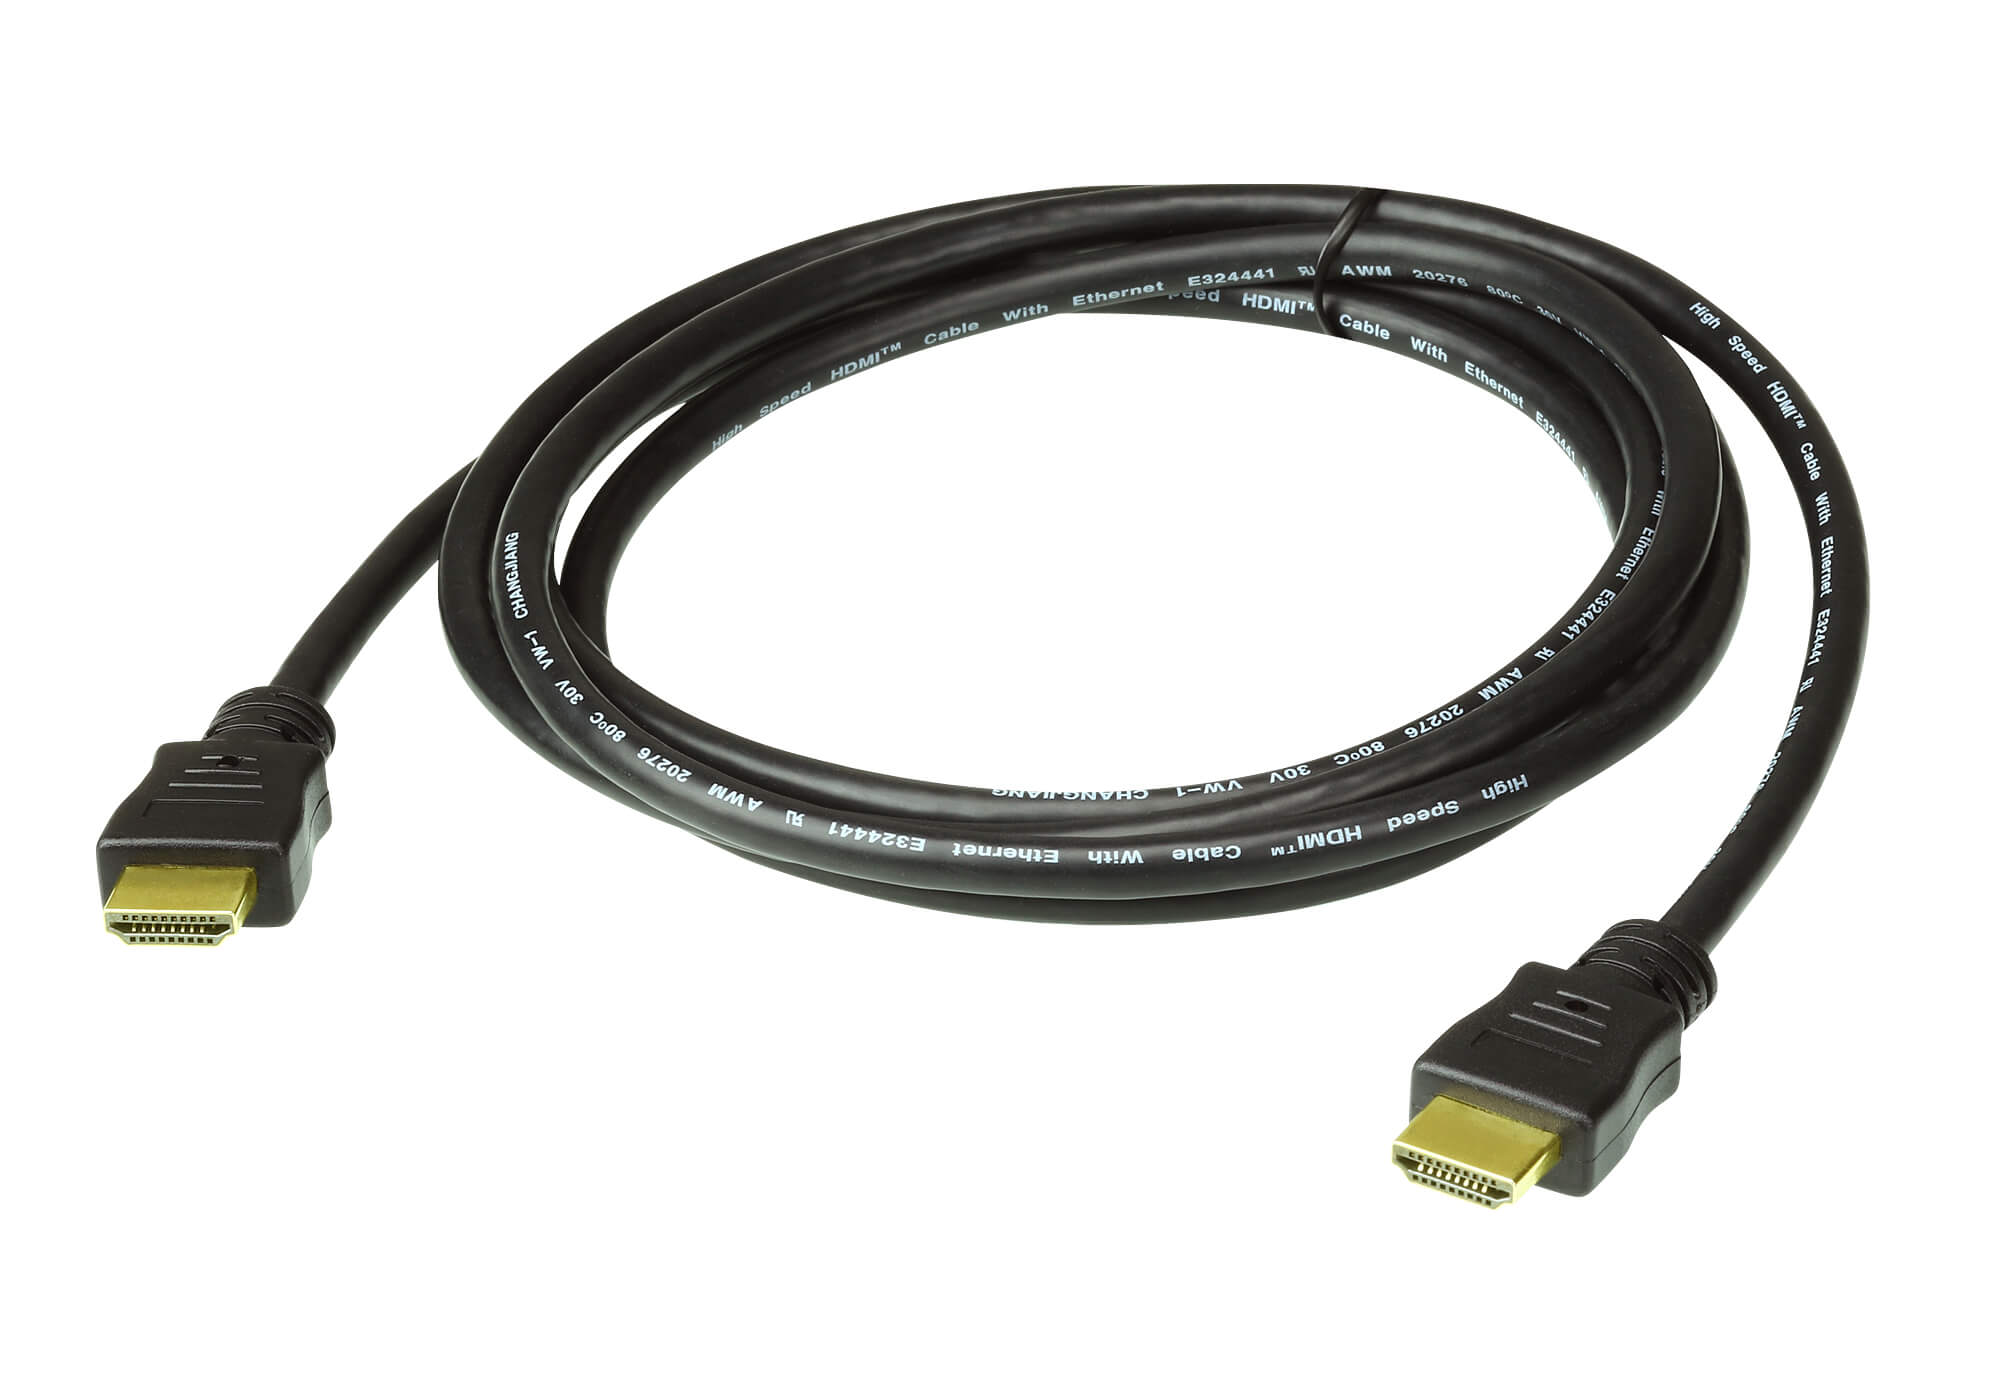 Aten 1.8m High Speed True 4K HDMI Cable with Ethernet  2L-7D02H